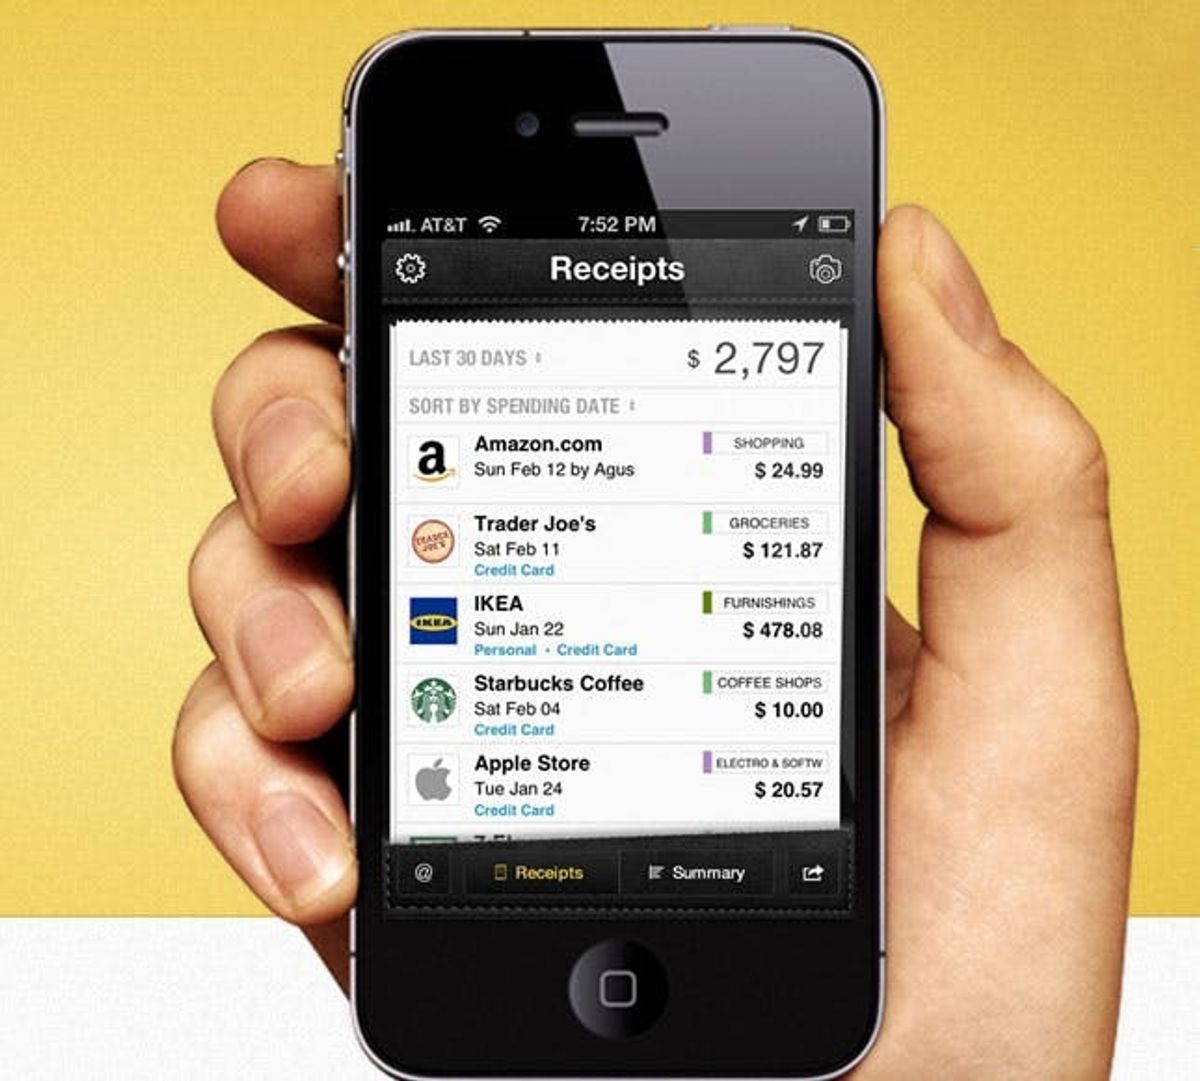 A Digital Wallet App That Stores Coupons, Credit Cards & More!